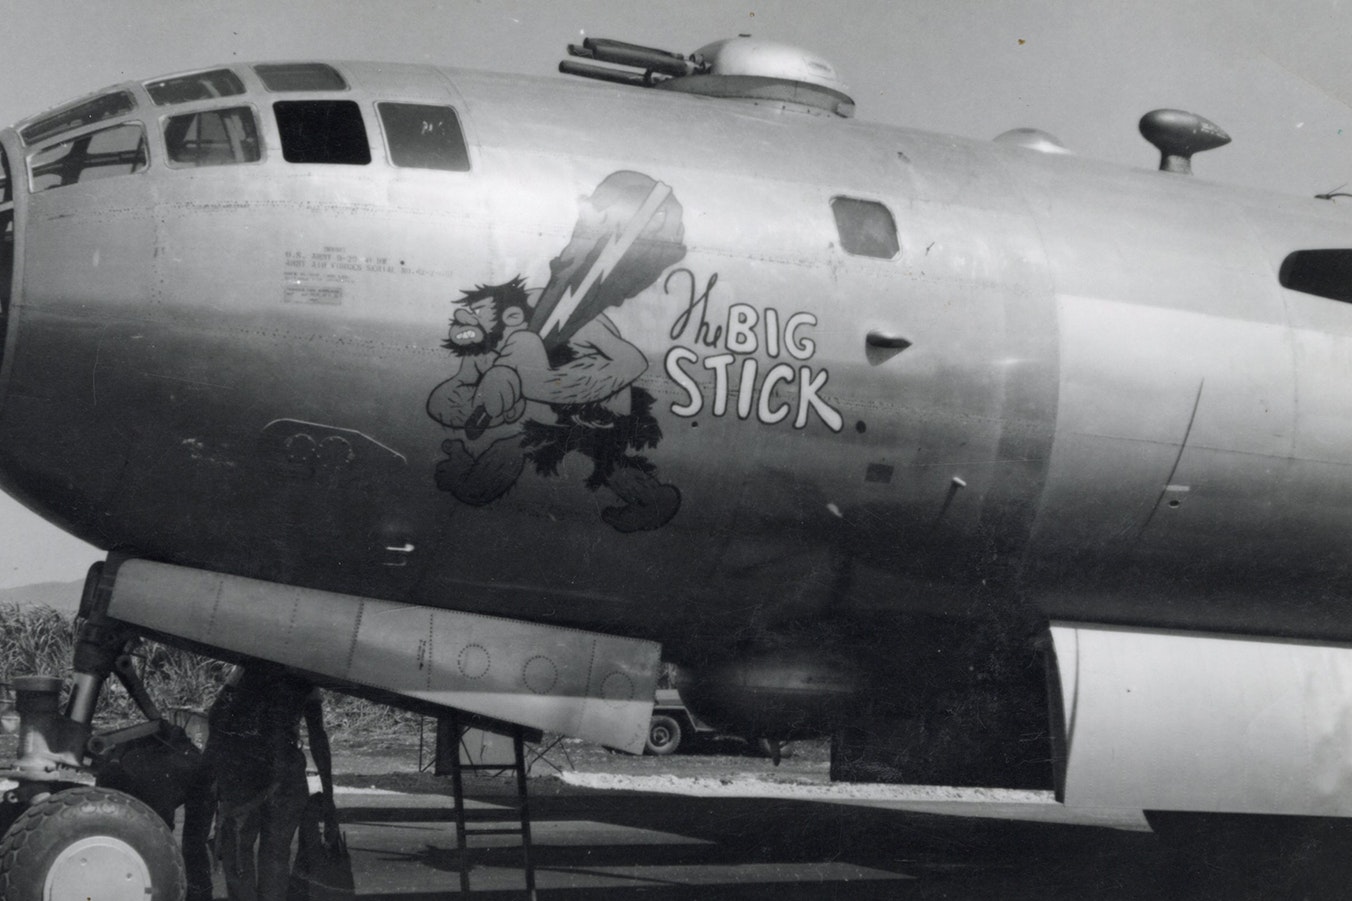 The B-29 bomber flown on bombing raids over Japan was named “Big Stick” and carried original art drawn by Walt Disney himself.